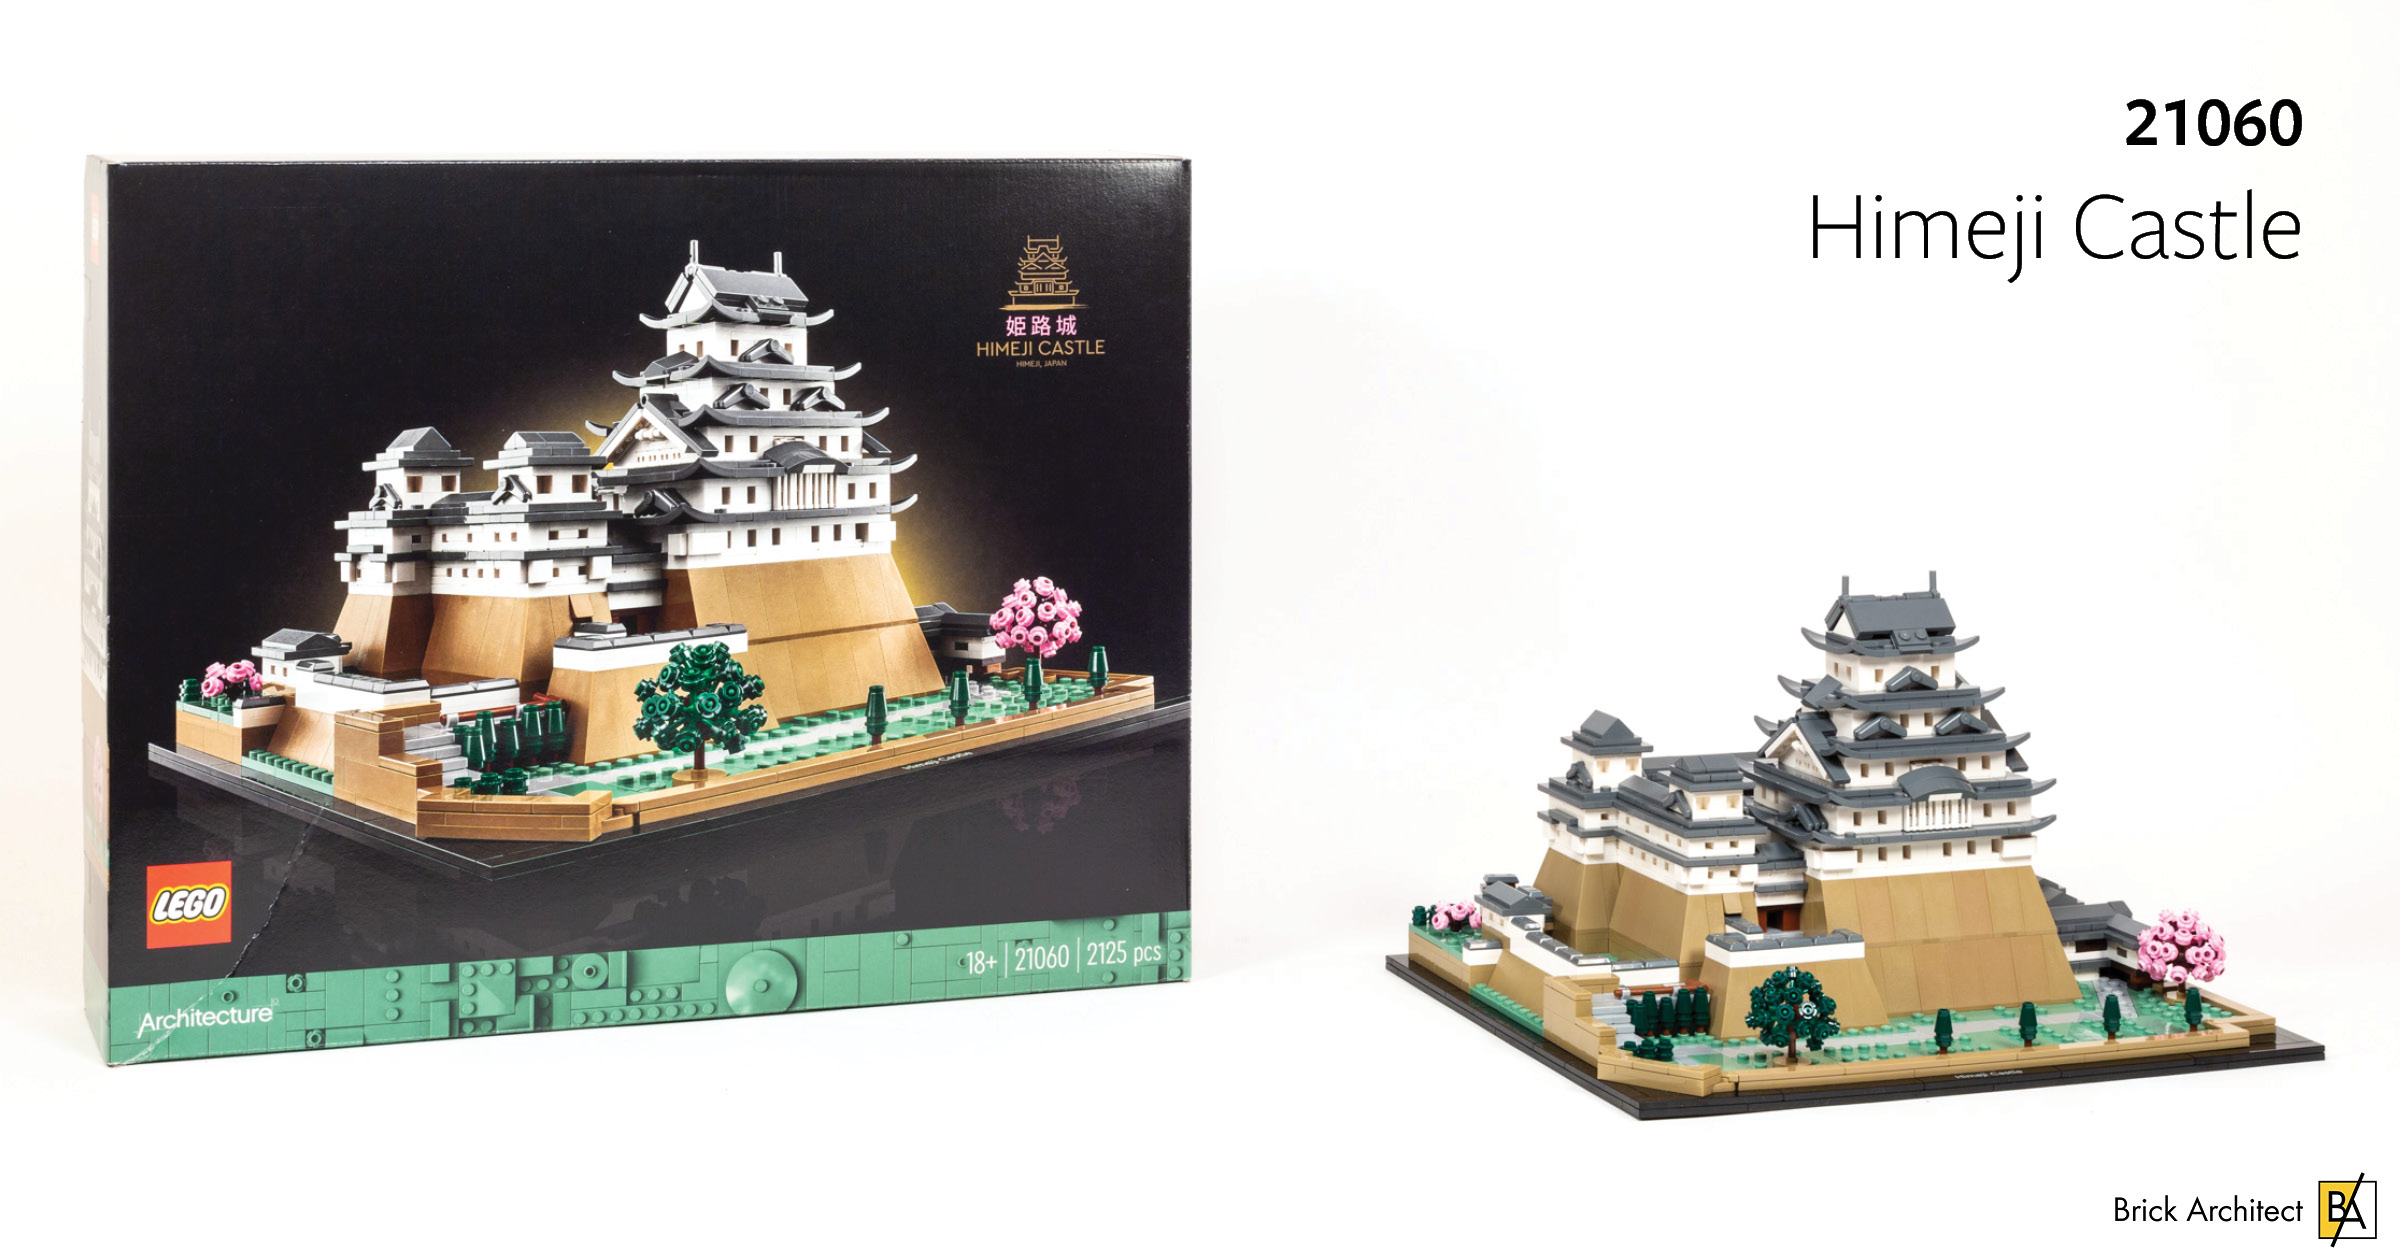 #21060 Himeji Castle is the best of what LEGO Architecture has to offer.